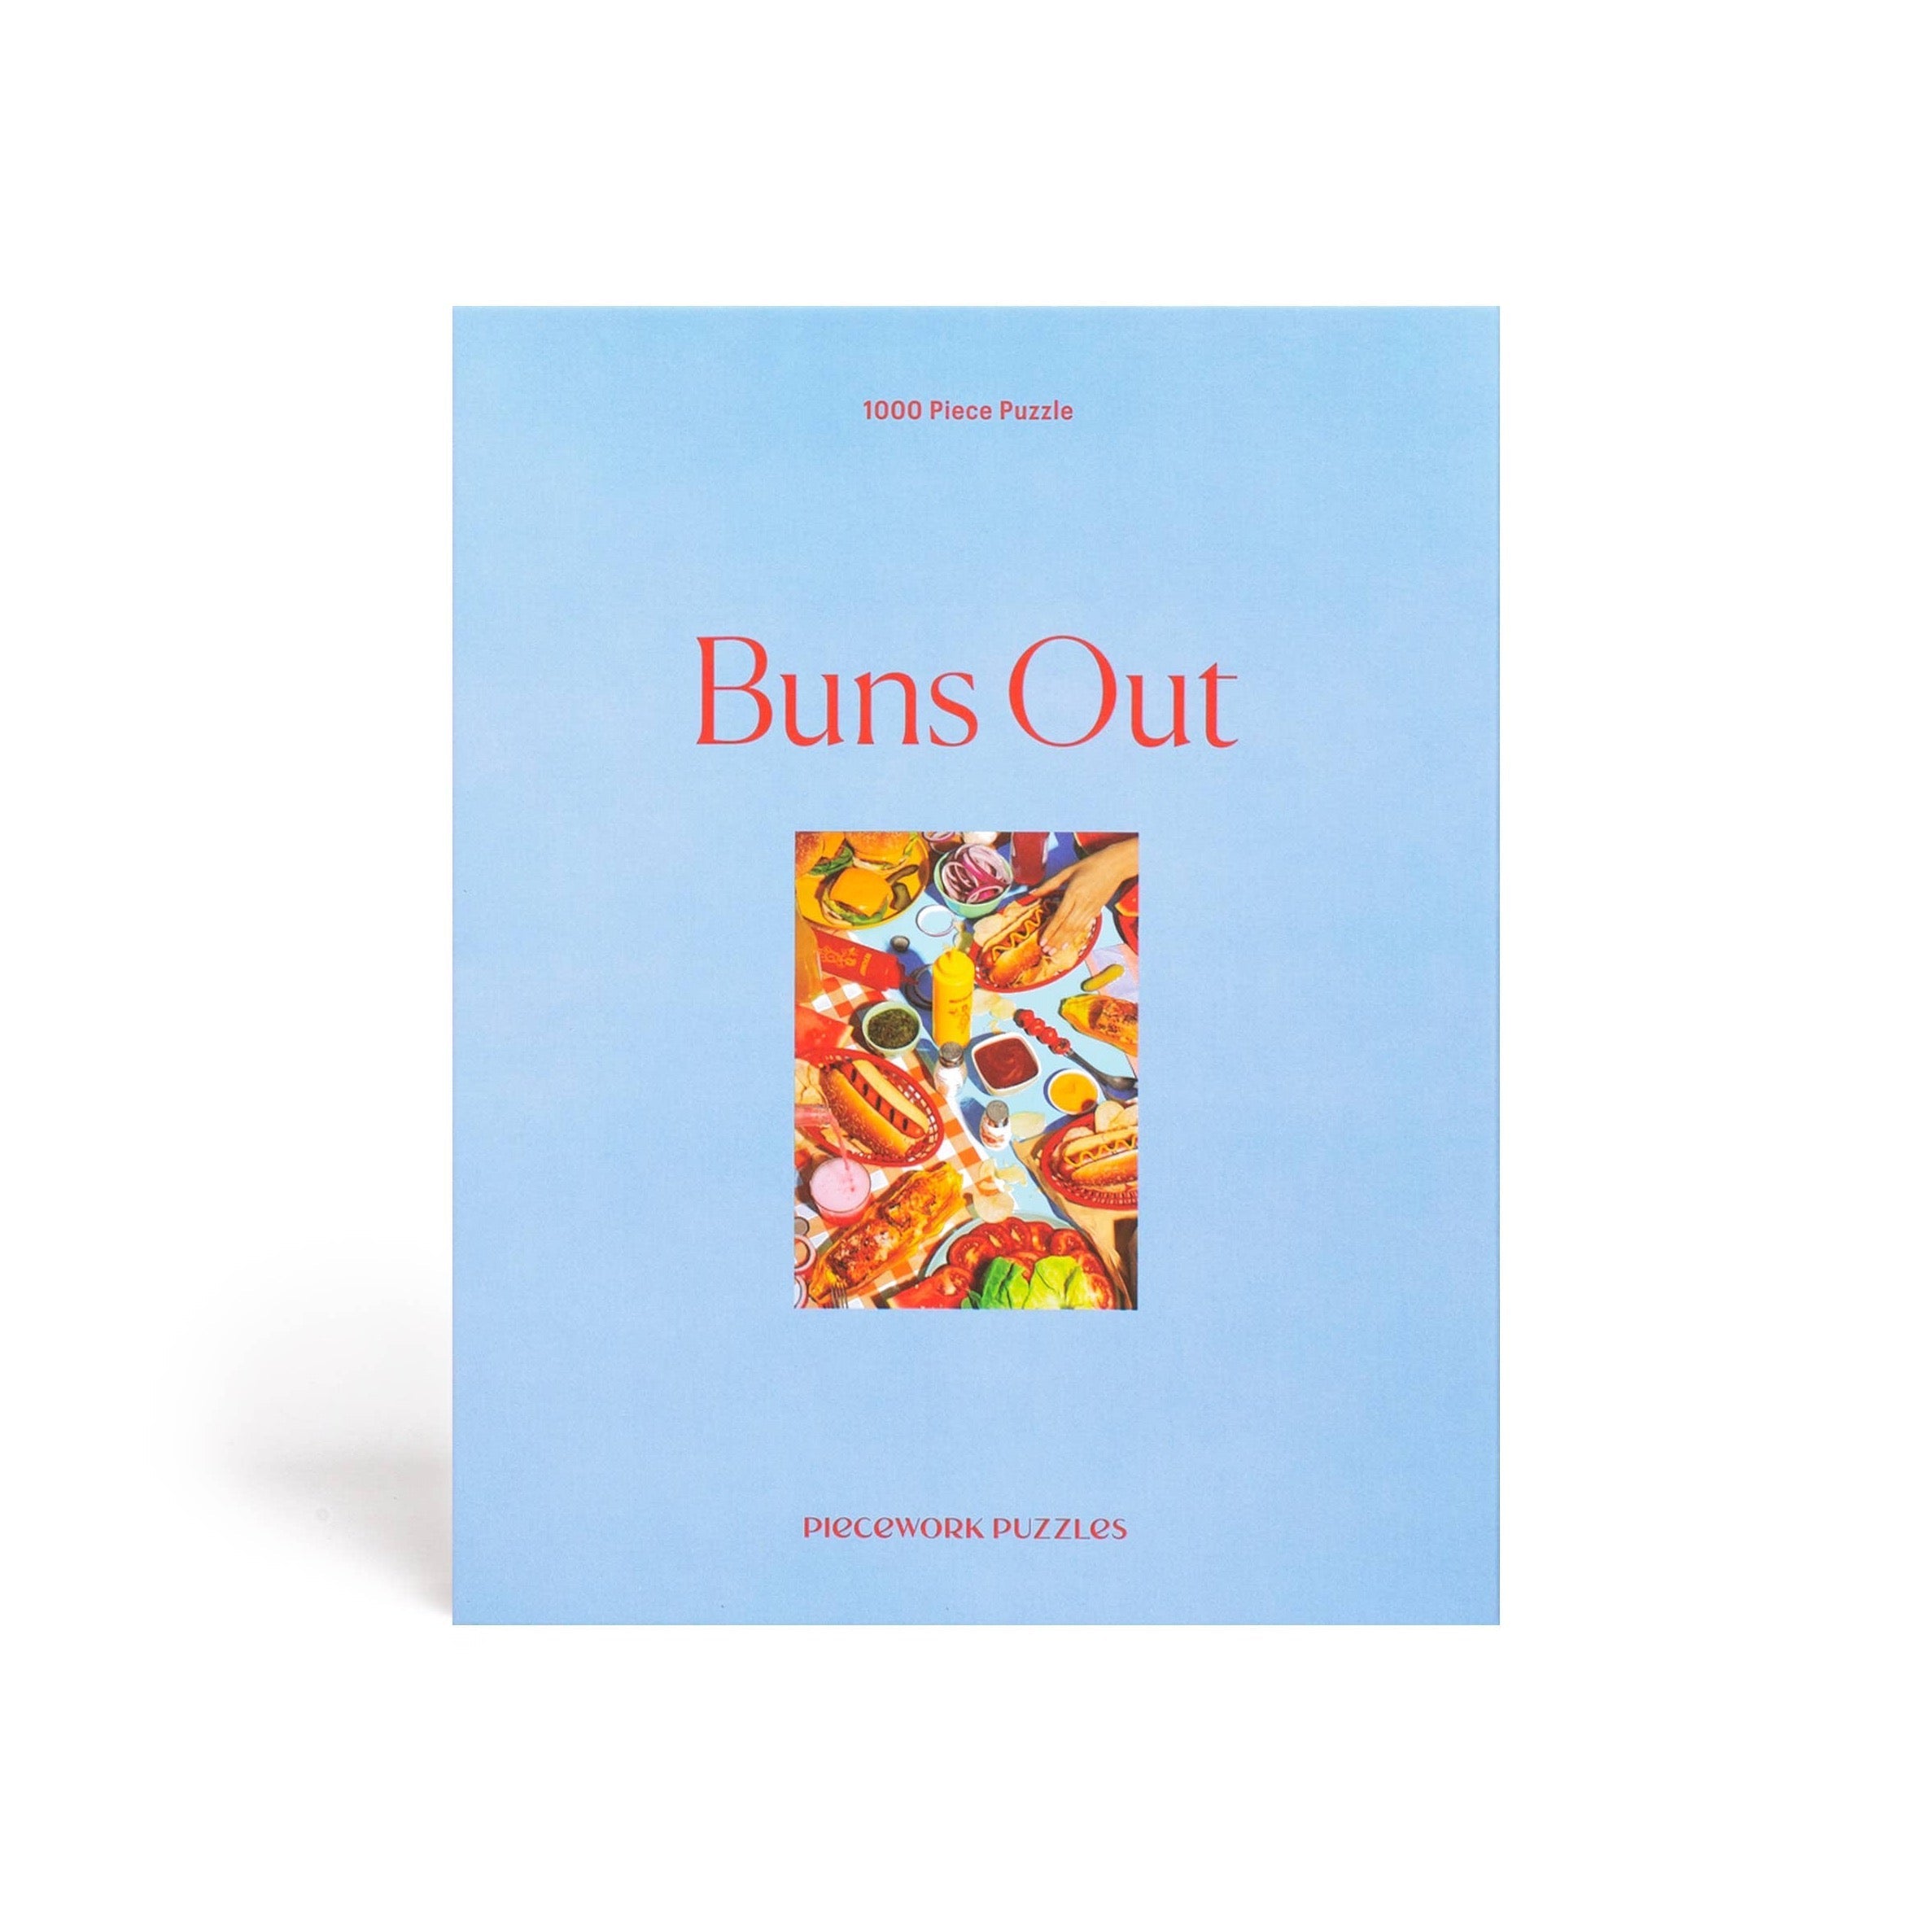 Buns Out 1000 Piece Puzzle by Piecework Puzzles